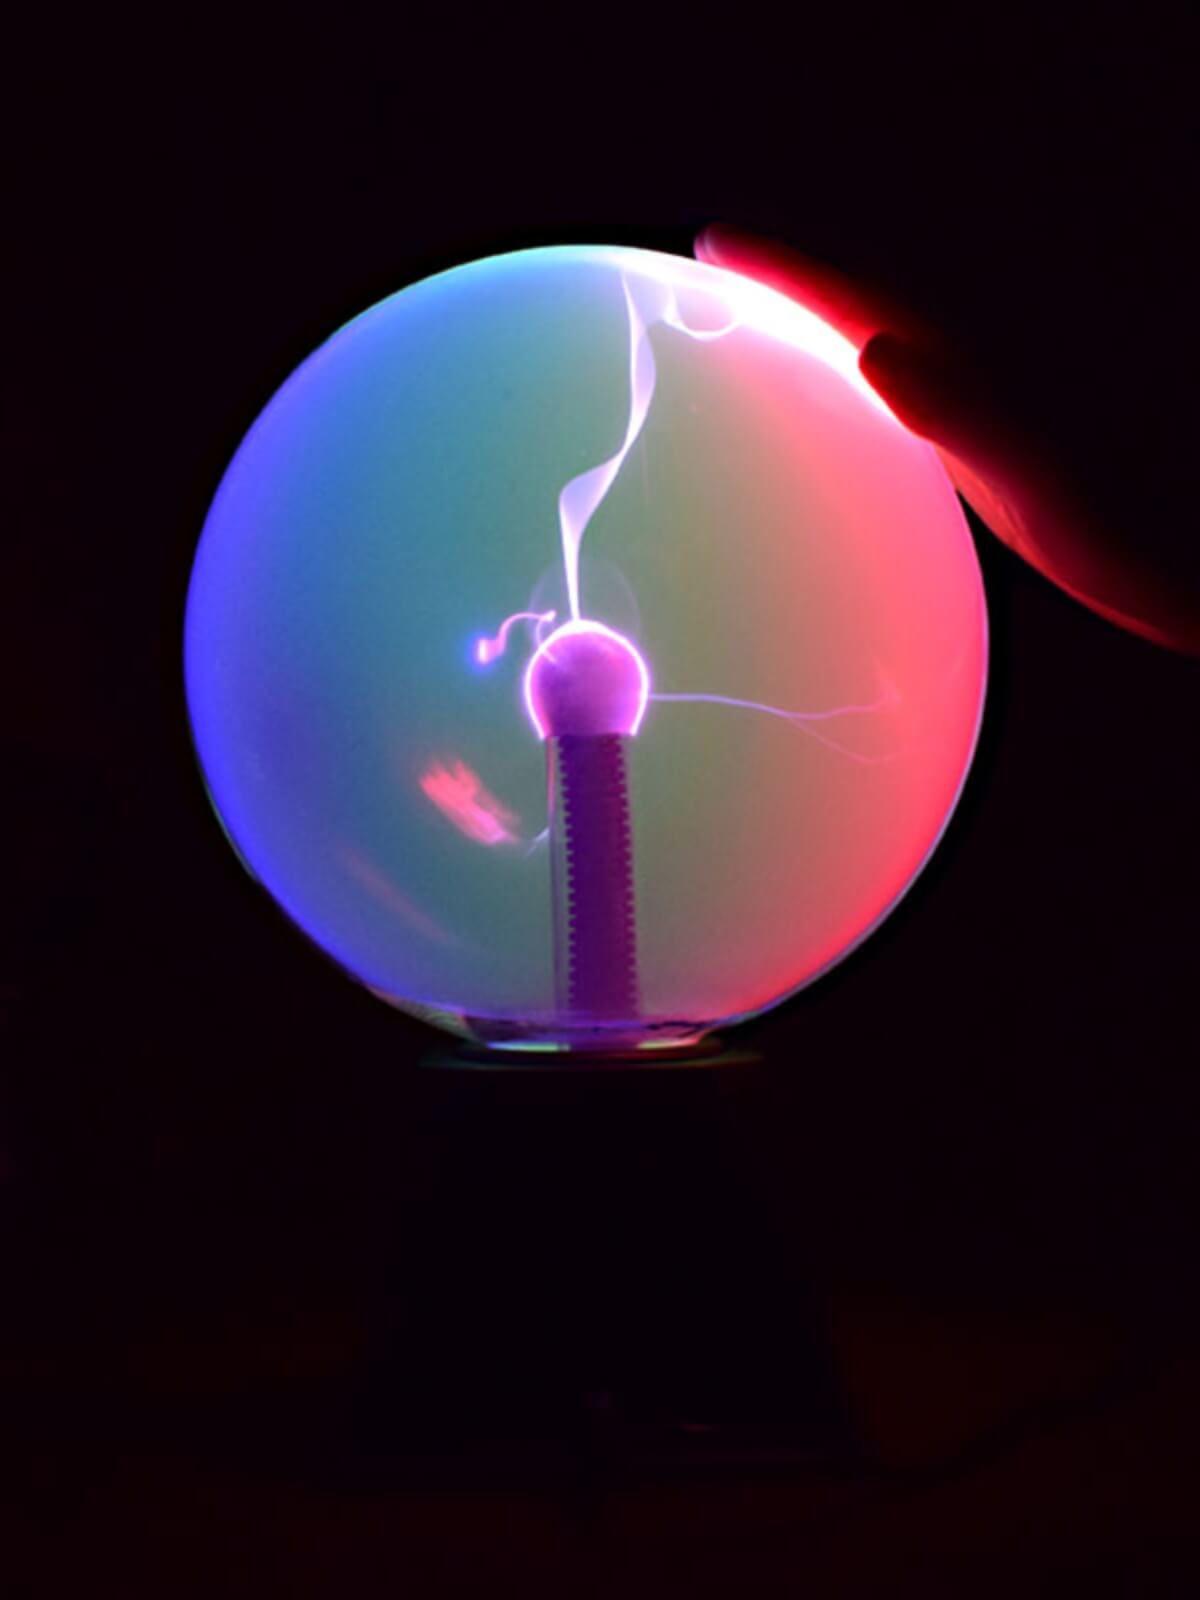 Touch & Sound Sensitive Plasma Ball - 3 to 8 Inch Electric Lightning Sphere for Kids, Parties, Home Decor, and Christmas Gifts